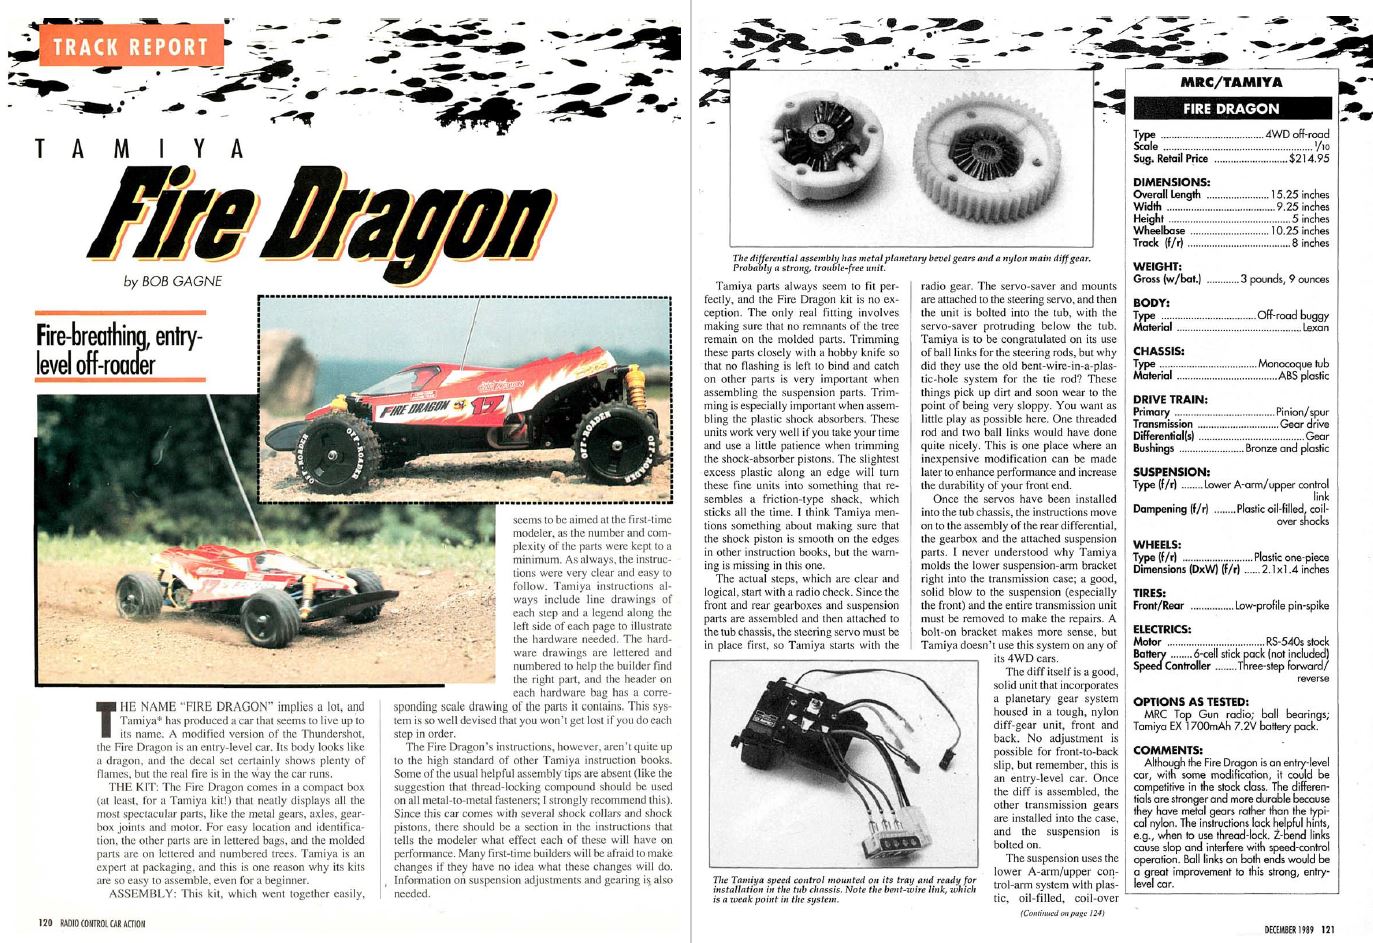 #TBT Tamiya Fire Dragon 4WD off-road Buggy Reviewed In December 1989 Issue